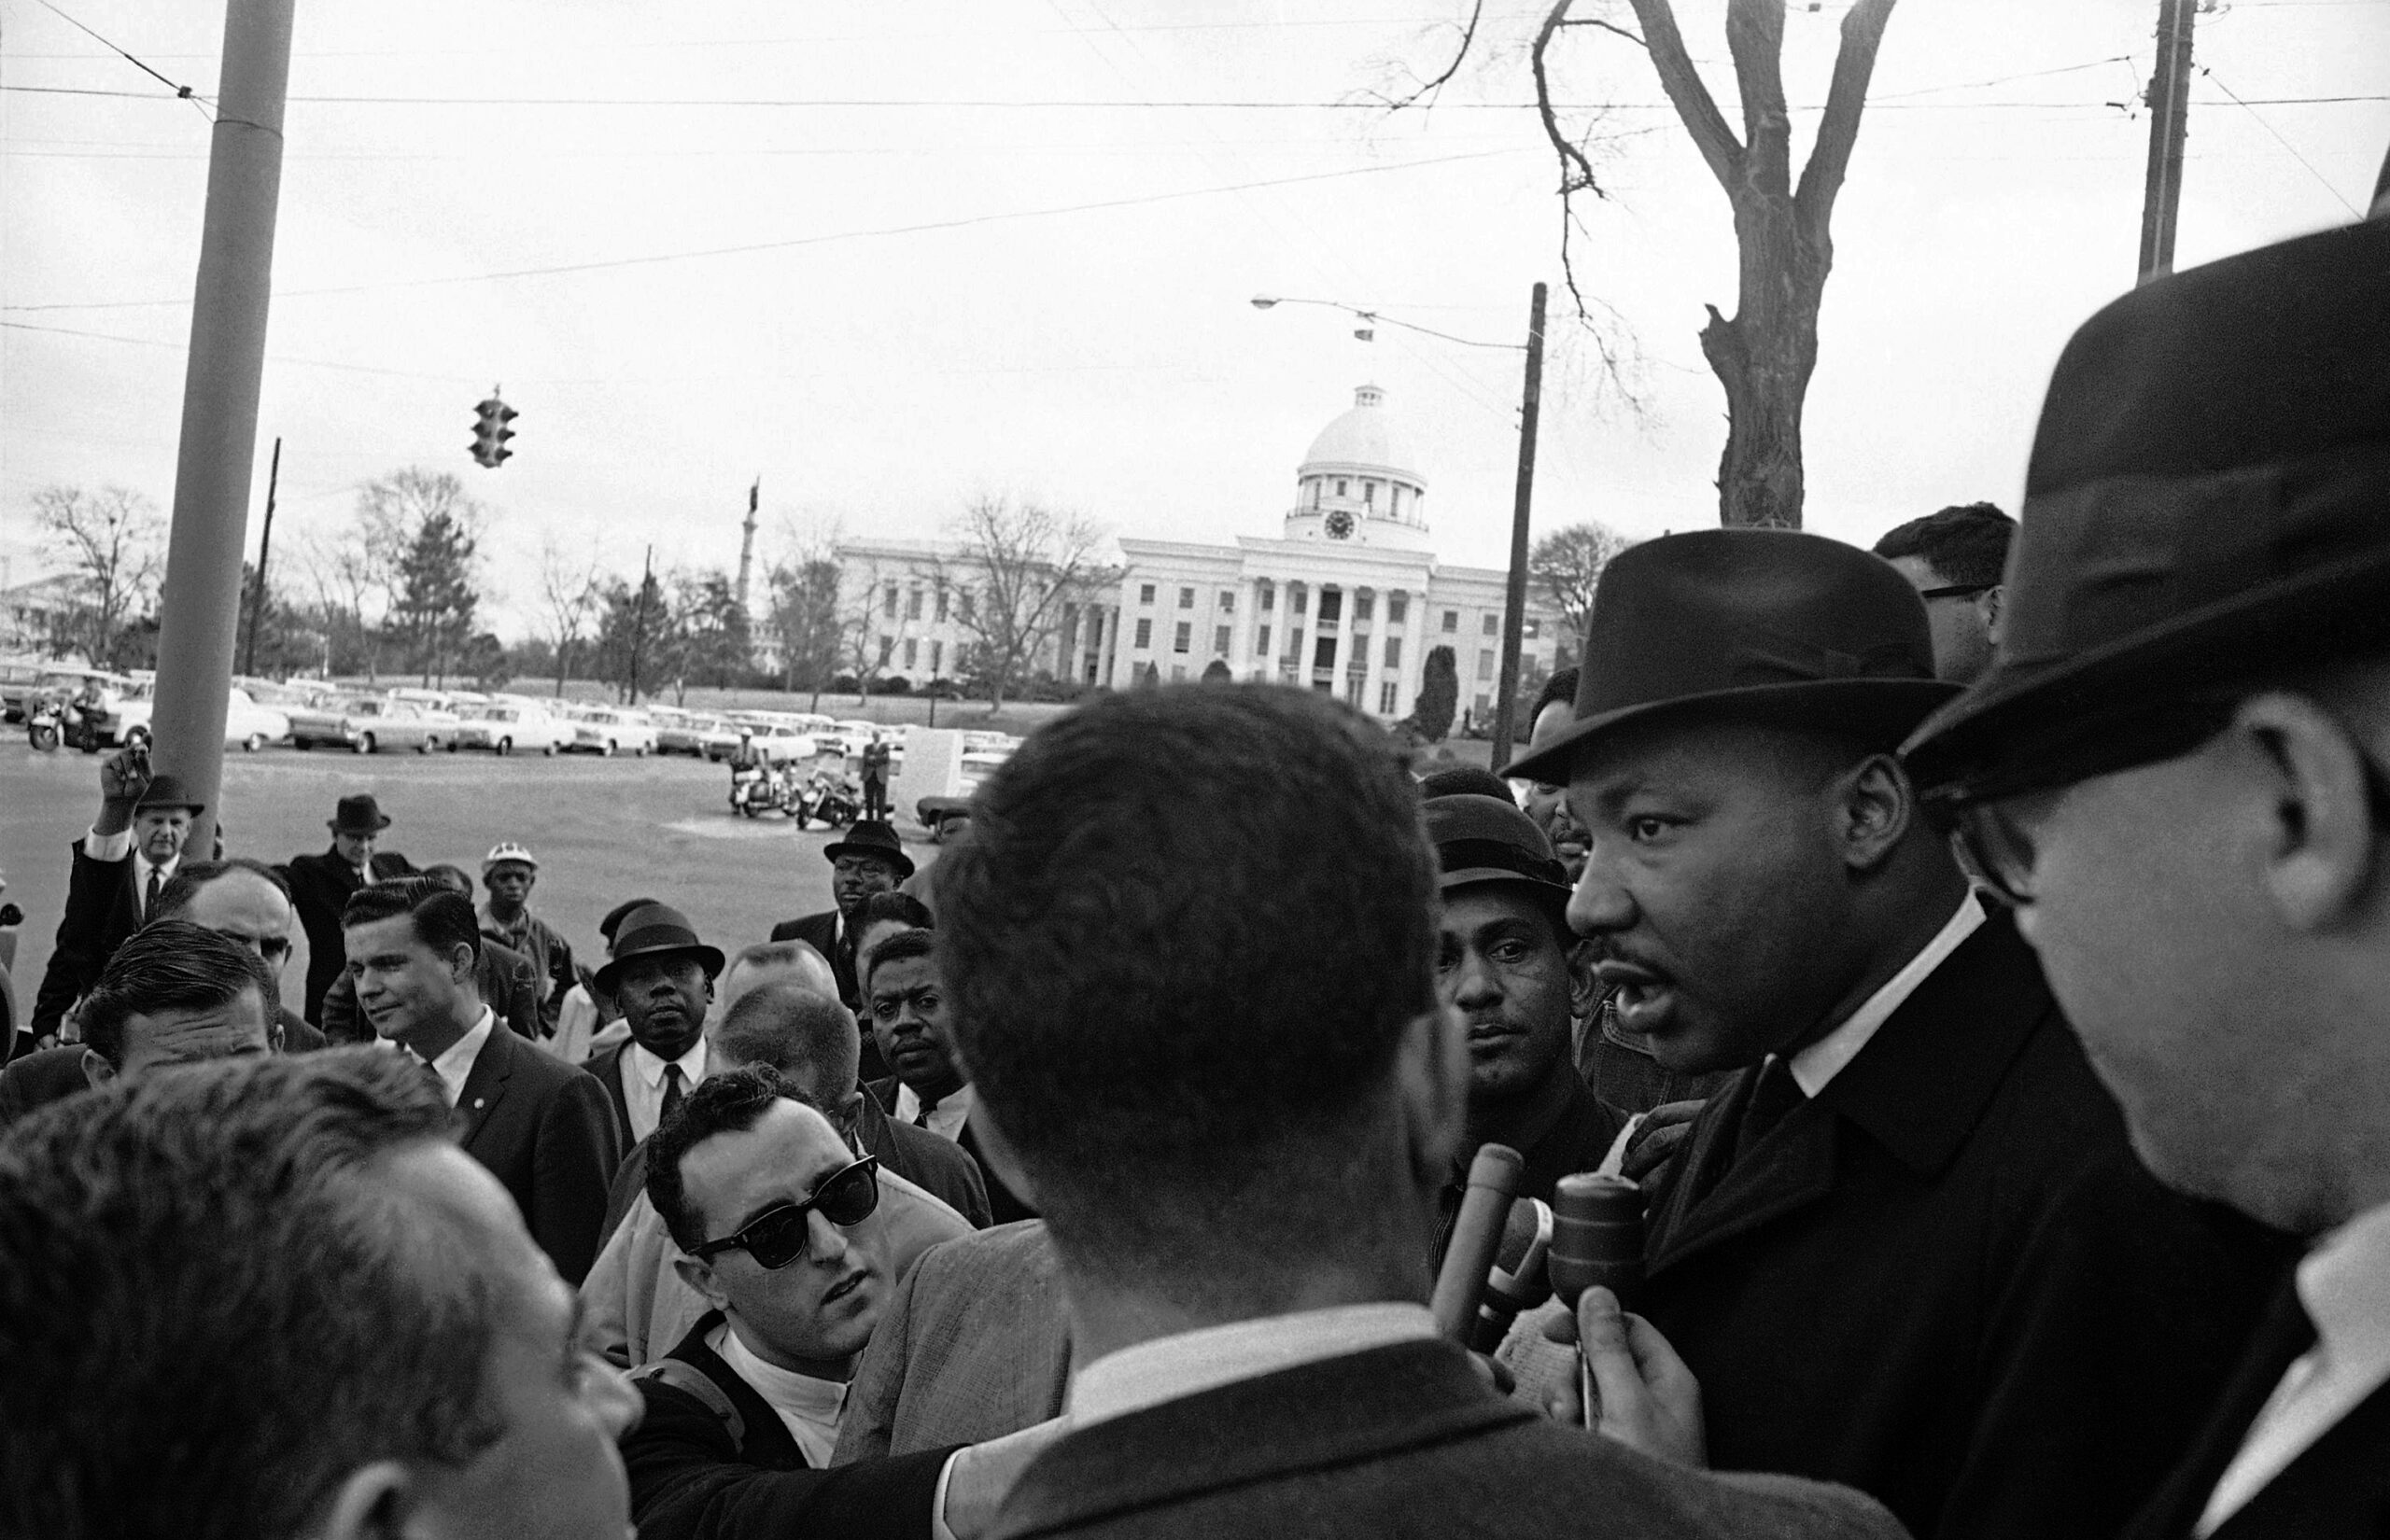 Dr. Martin Luther King Jr. is interviewed on the steps of the Dexter Avenue Baptist Church in Montgomery, Alabama on Feb. 9, 1965, kickoff point for a voter registration march. King had called for 1,000 of his race for the march but only about 200 showed